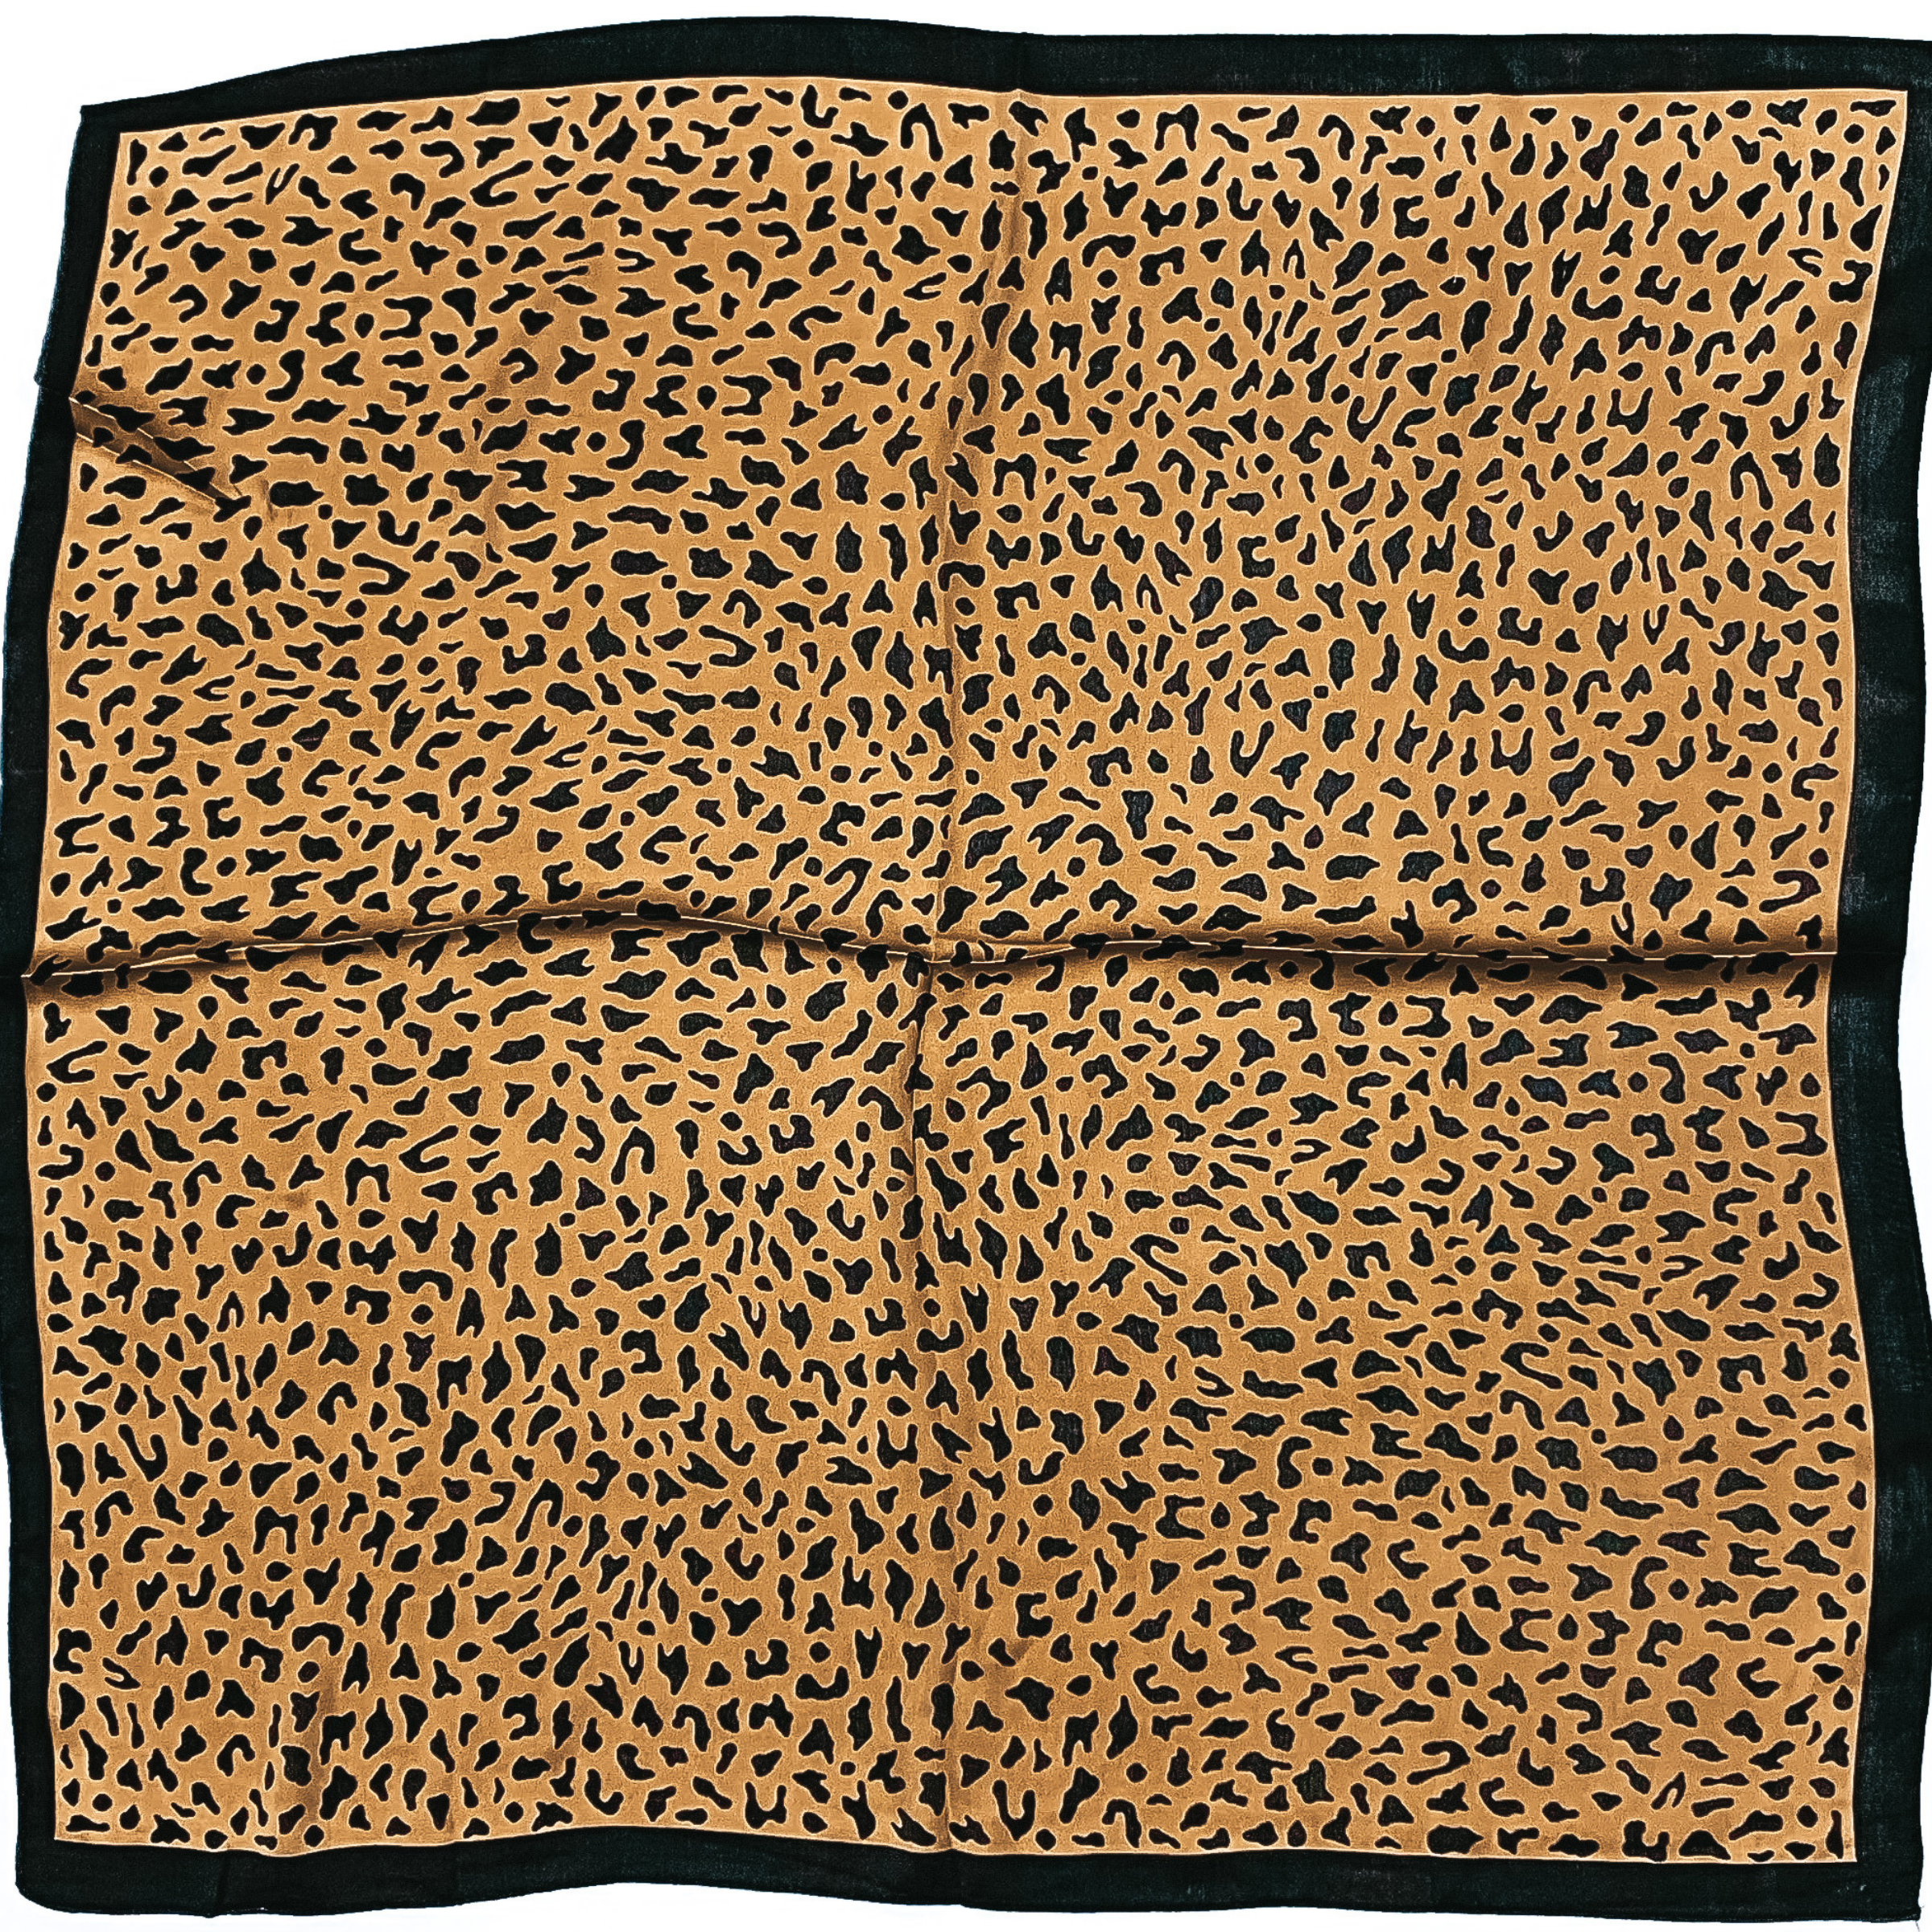 Cheetah Print Scarf in Tan and Black - Giddy Up Glamour Boutique